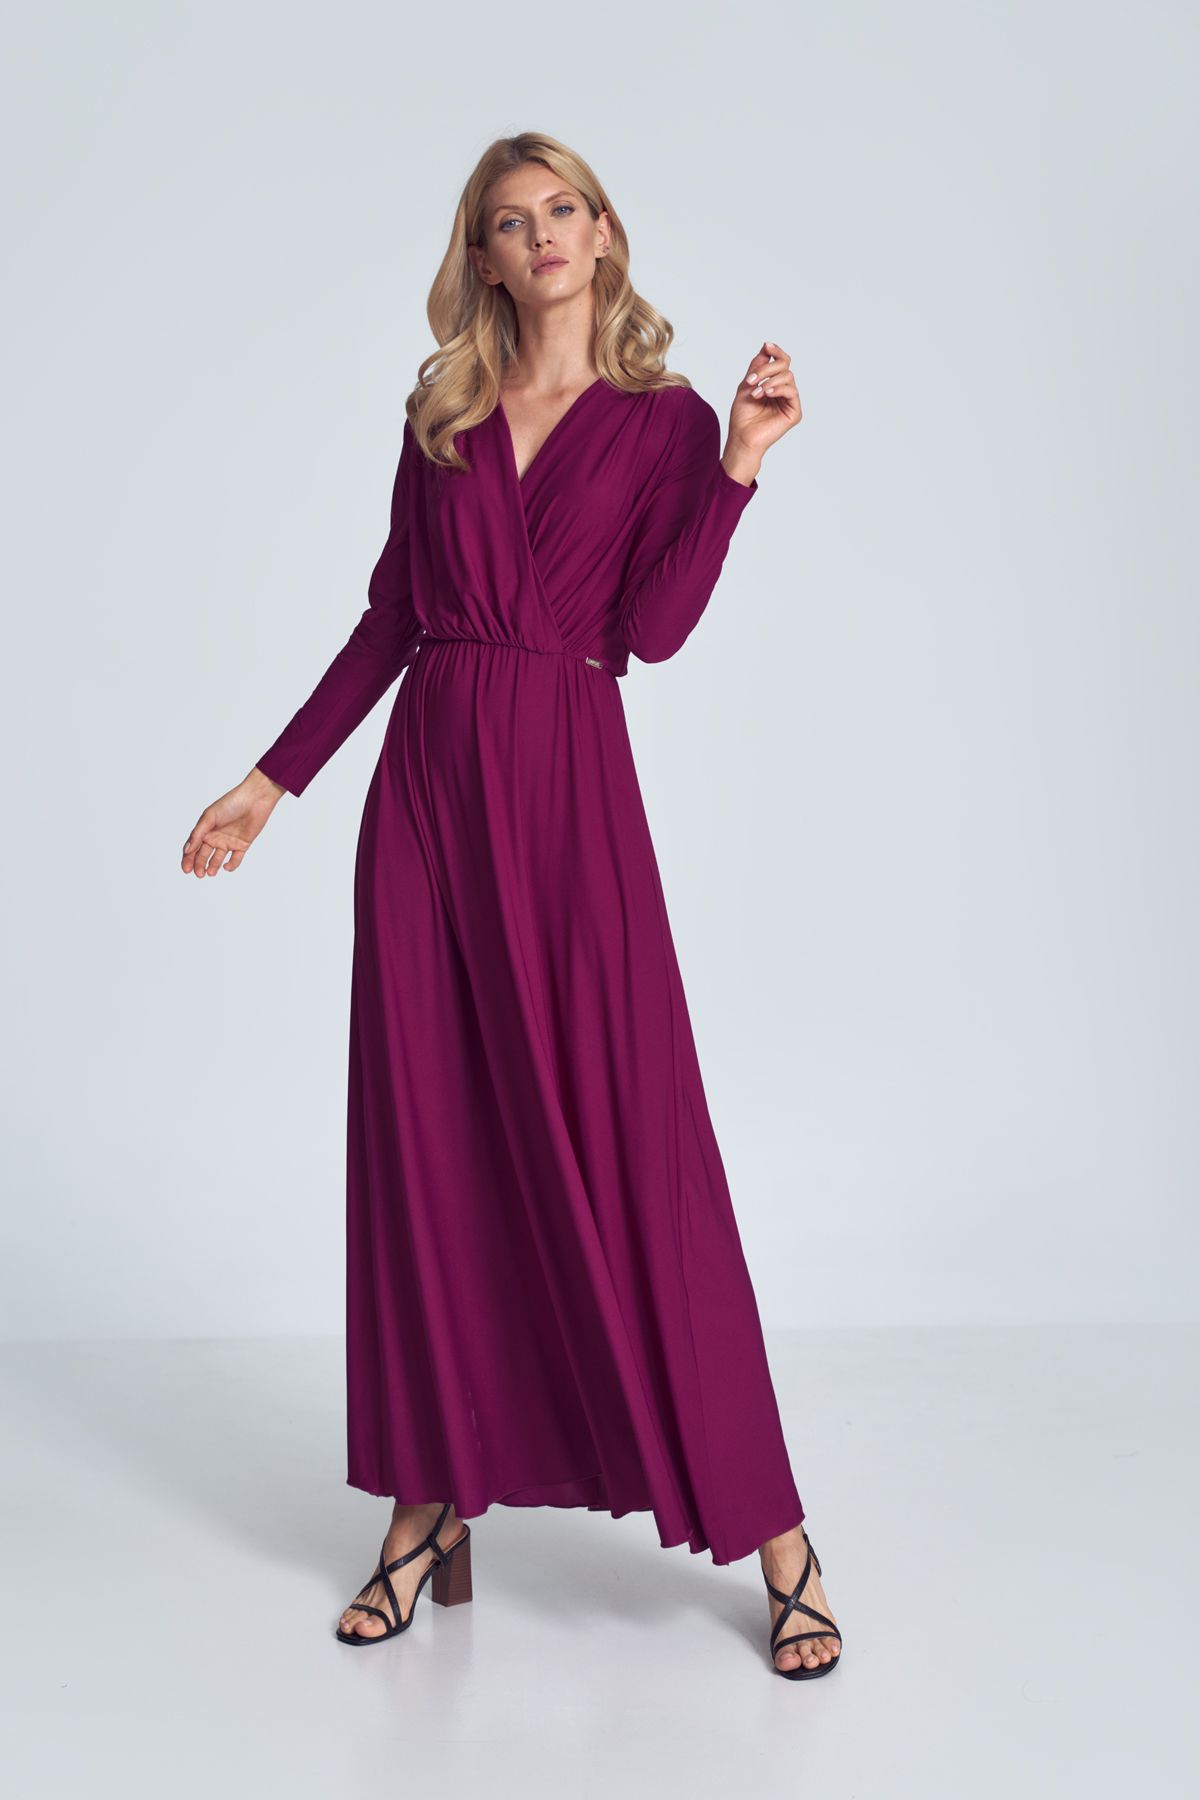 Fuchsia maxi dress with long sleeves, wrap creased neckline, elasticated band sewn in the waist.